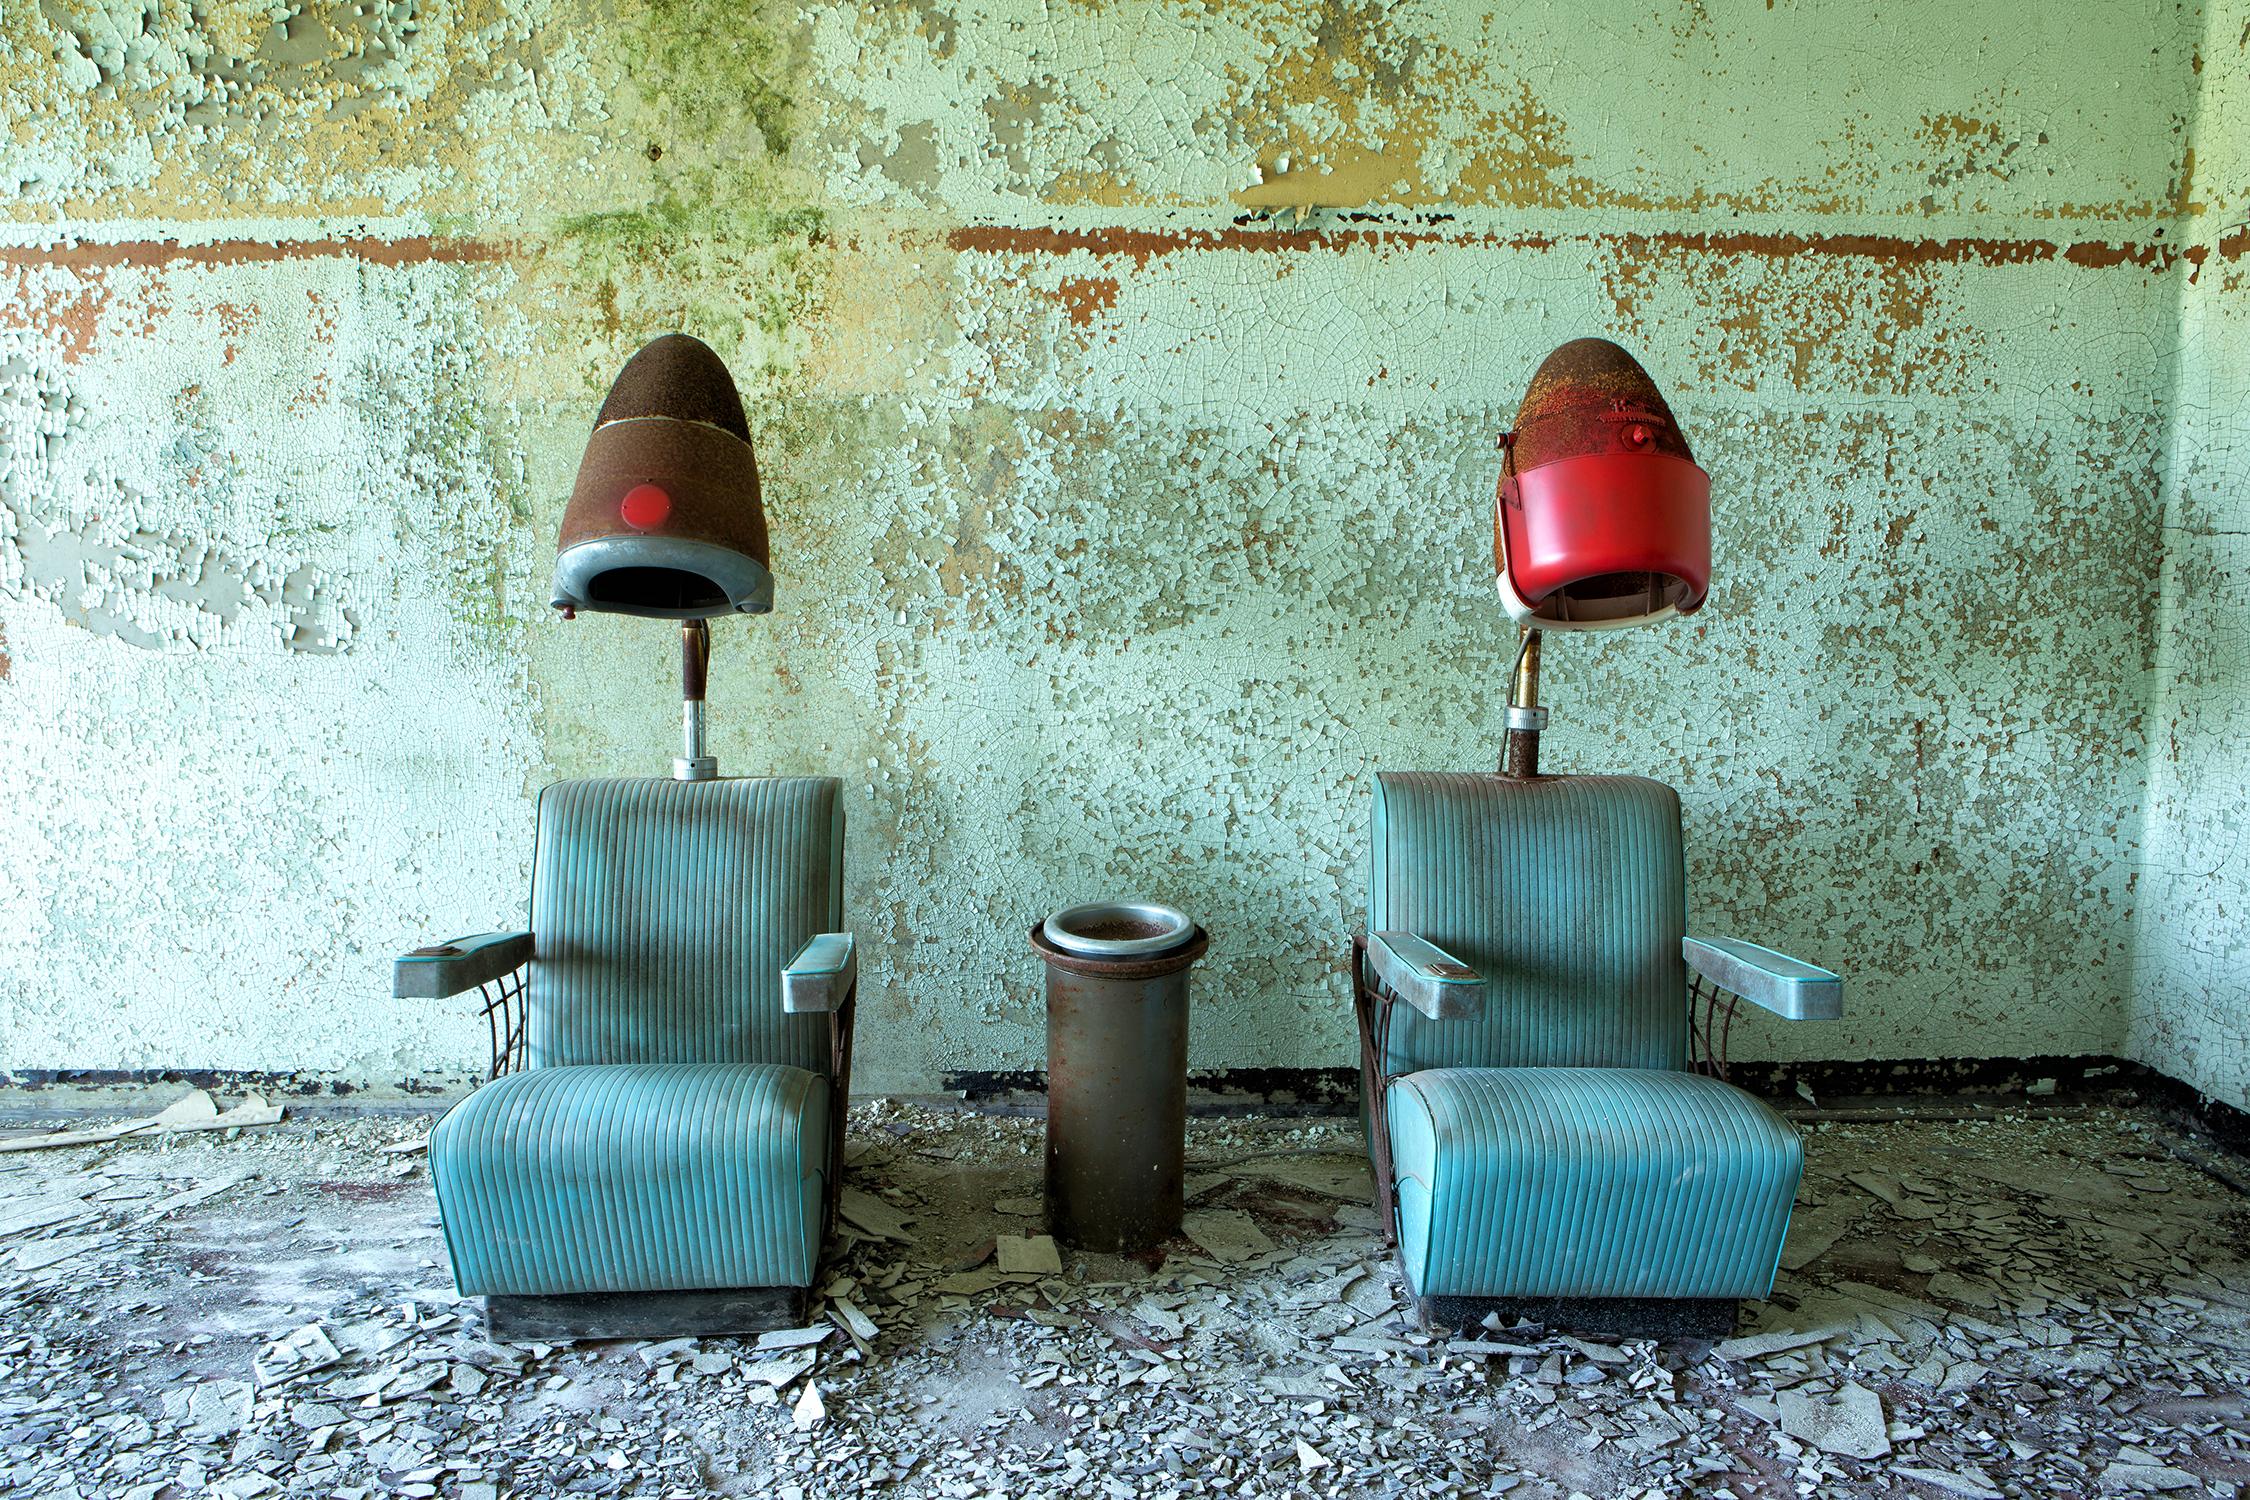 Rebecca Skinner Color Photograph - "Gossip", abandoned salon, print on aluminum, ready to hang, blue, green